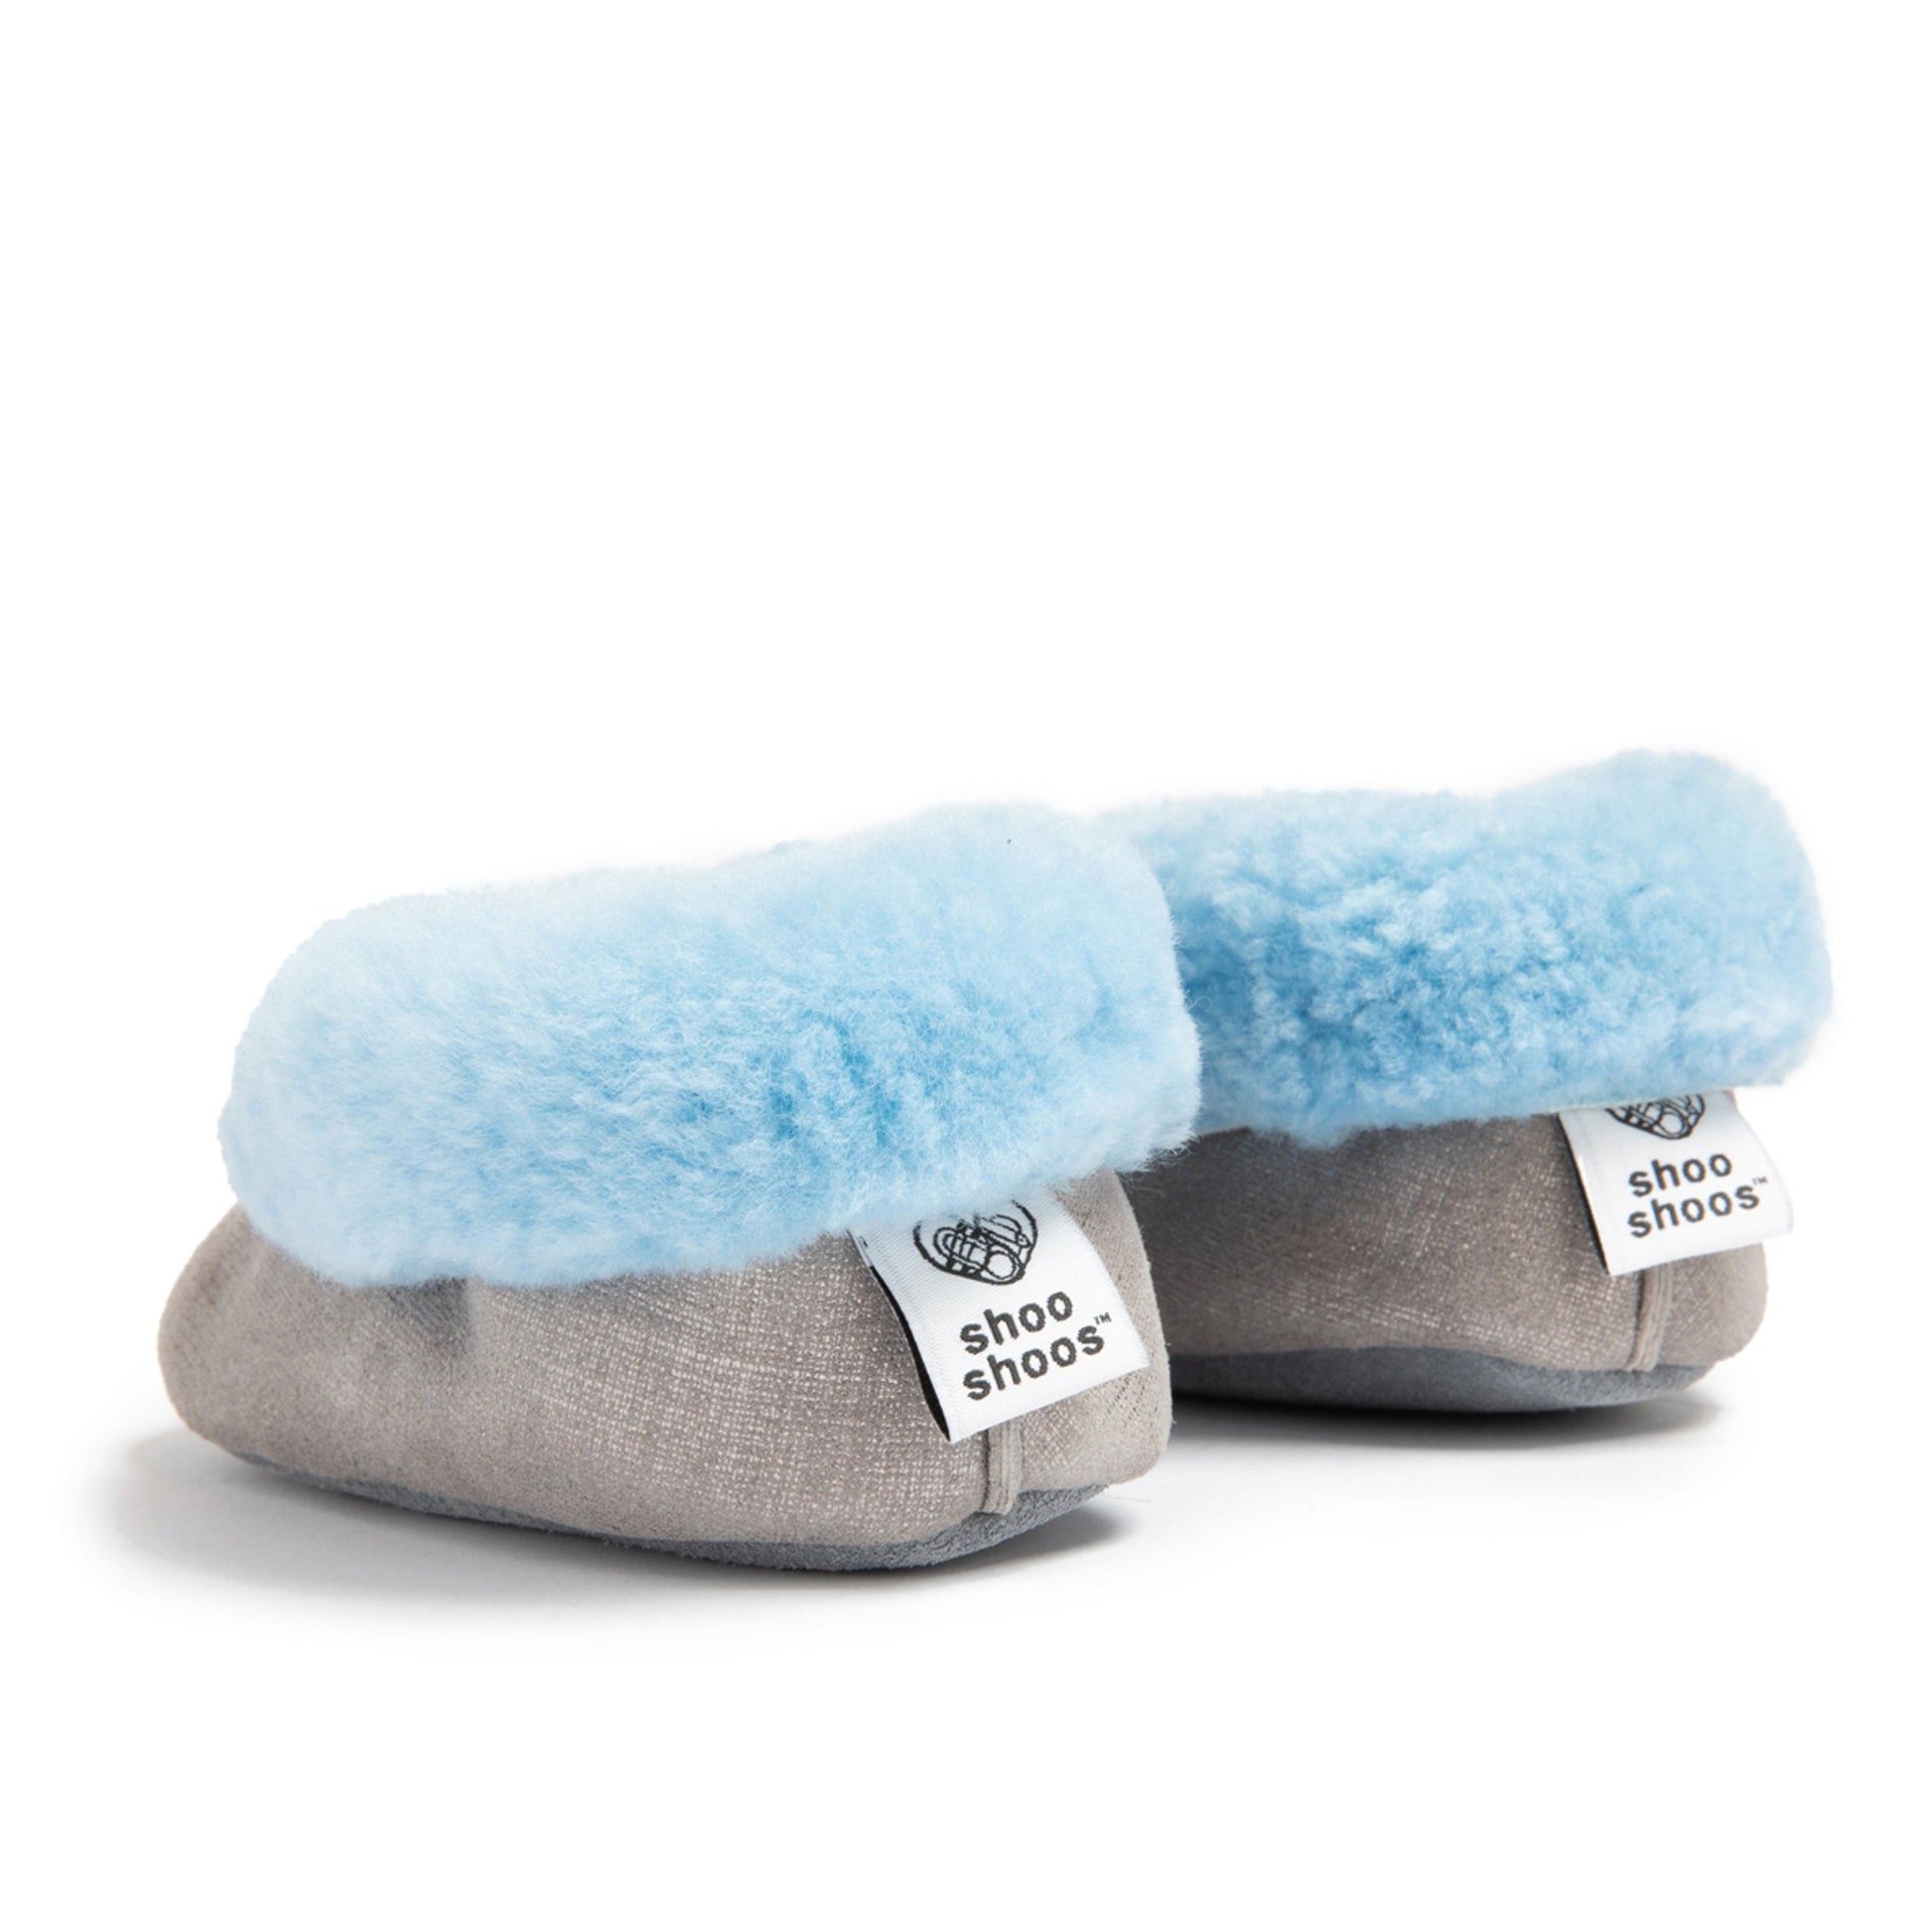 DASHER Soft Sole Slippers Grey & Blue (back view) - Shop Online | shooshoos.co.za